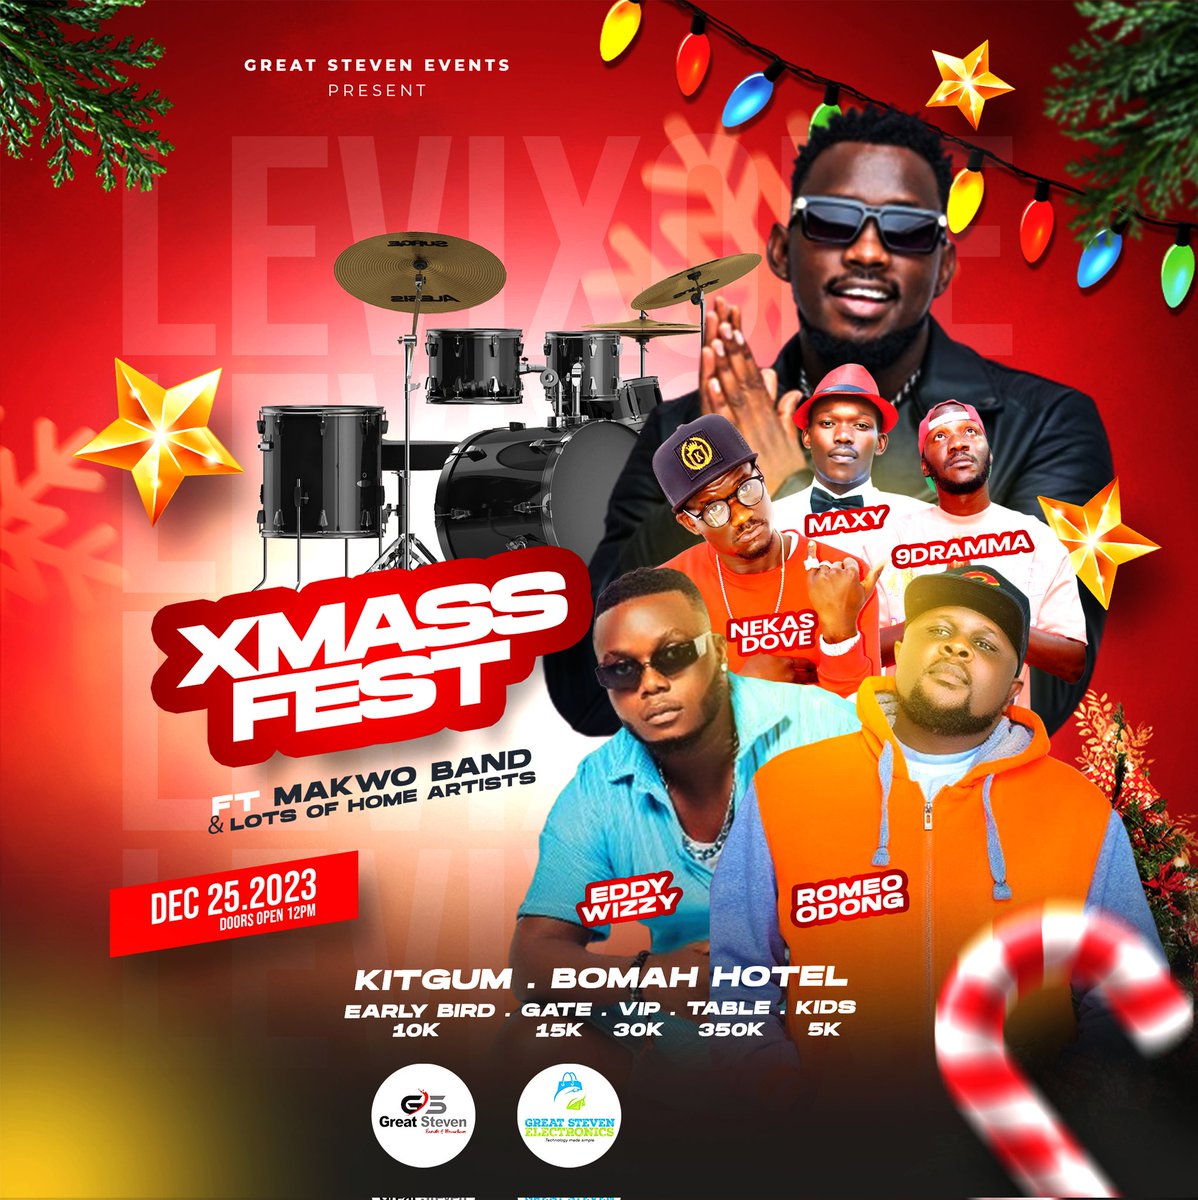 We’ve got physical ticket selling points running now.
🔥🔥
Get to : @bomahhotel@emmadreams@djsanu@rogerchosen

#XmassFest